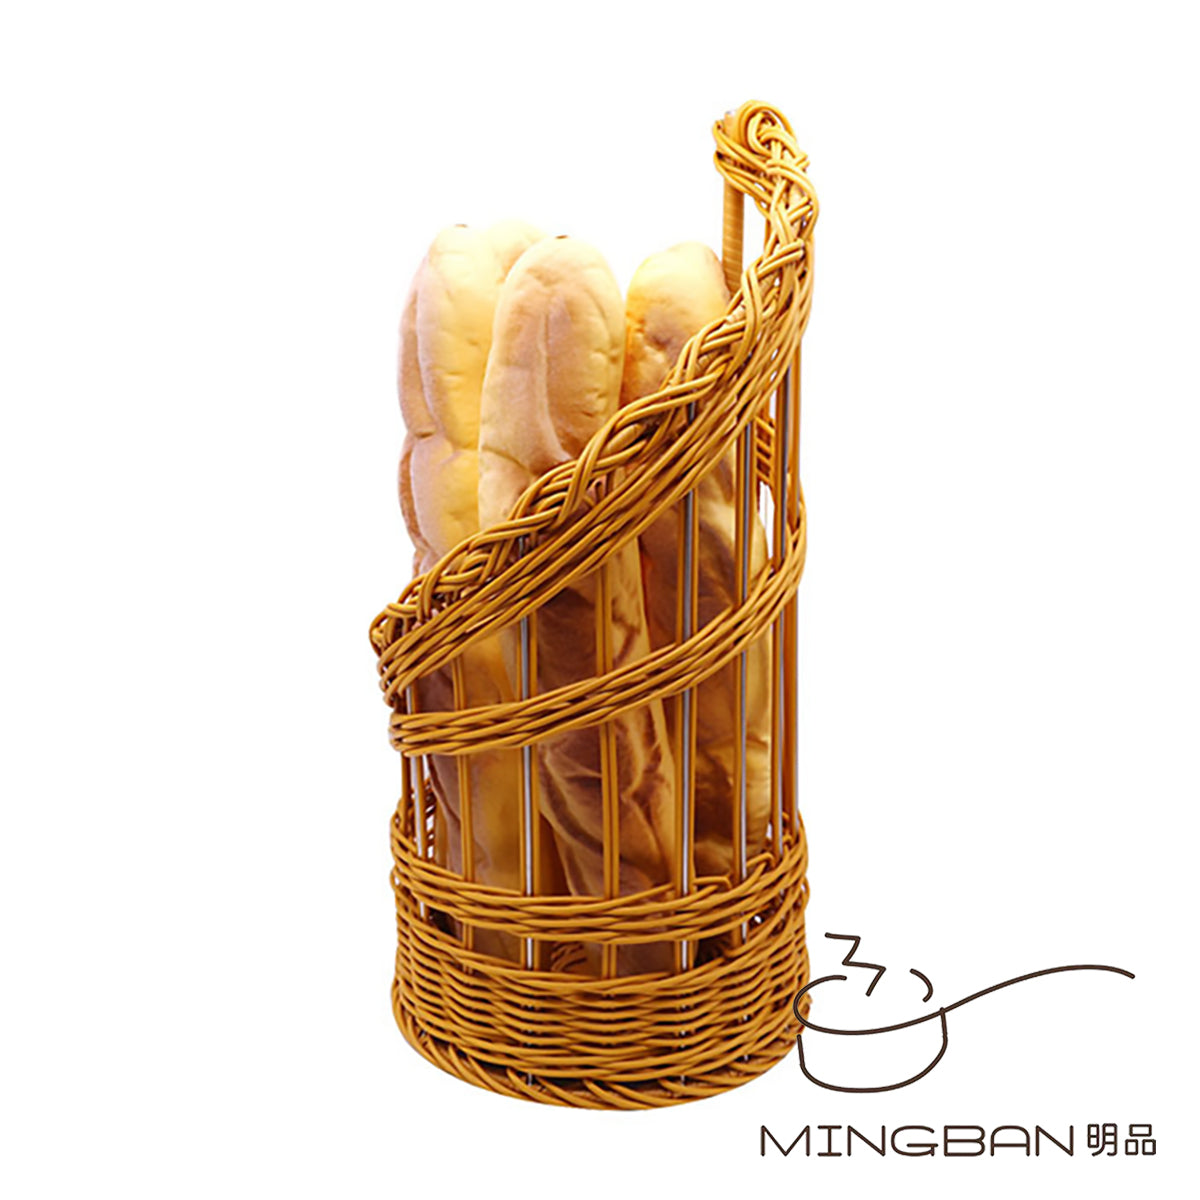 Hand Woven PP Rattan French Bread Basket